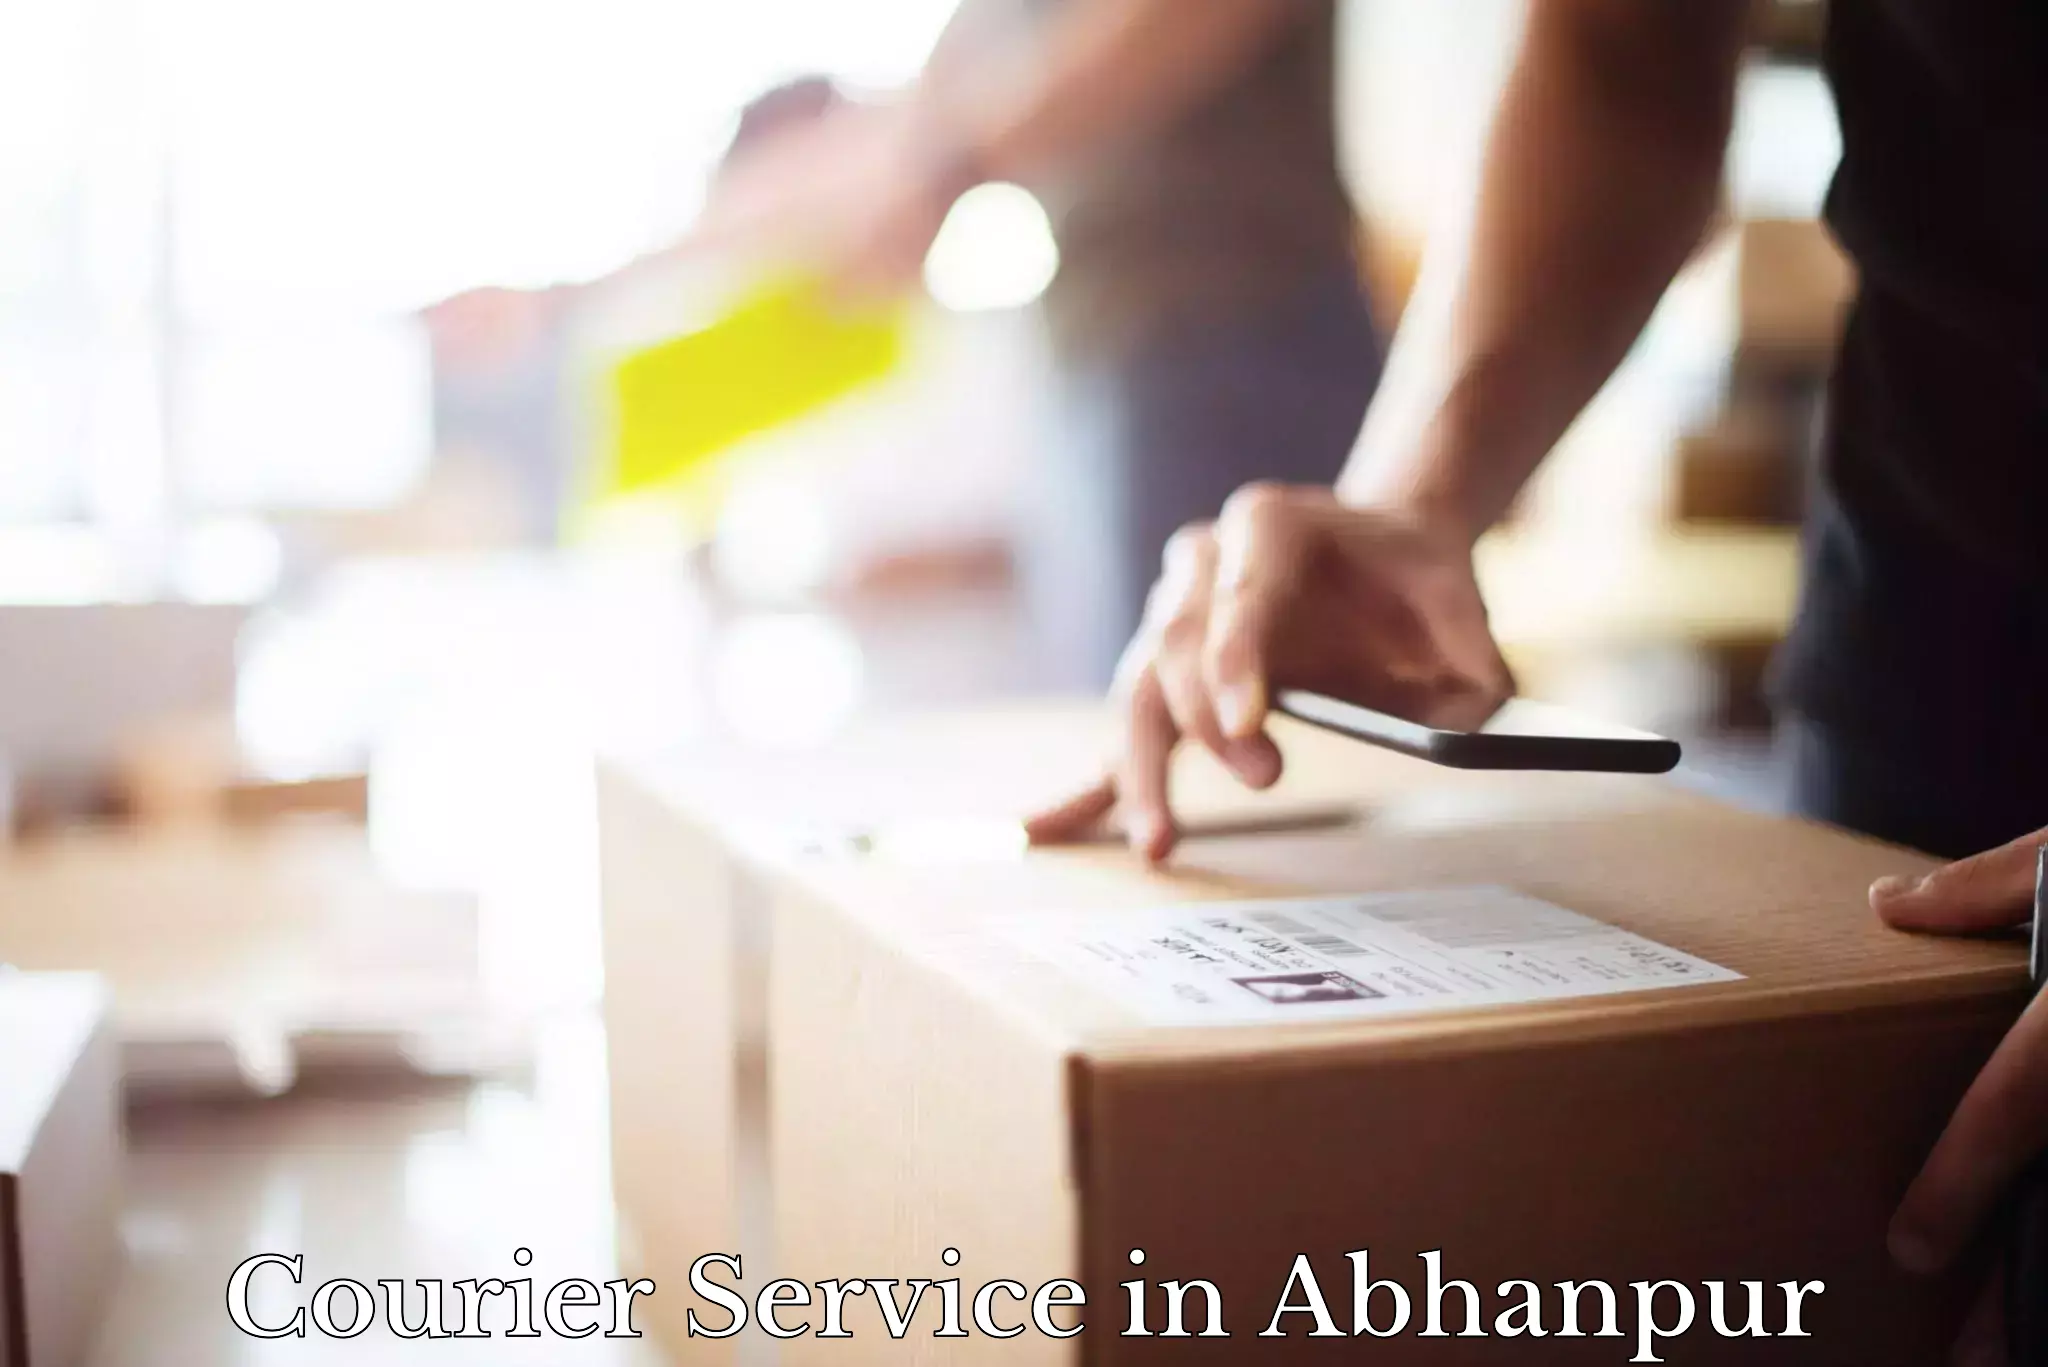 Innovative logistics solutions in Abhanpur